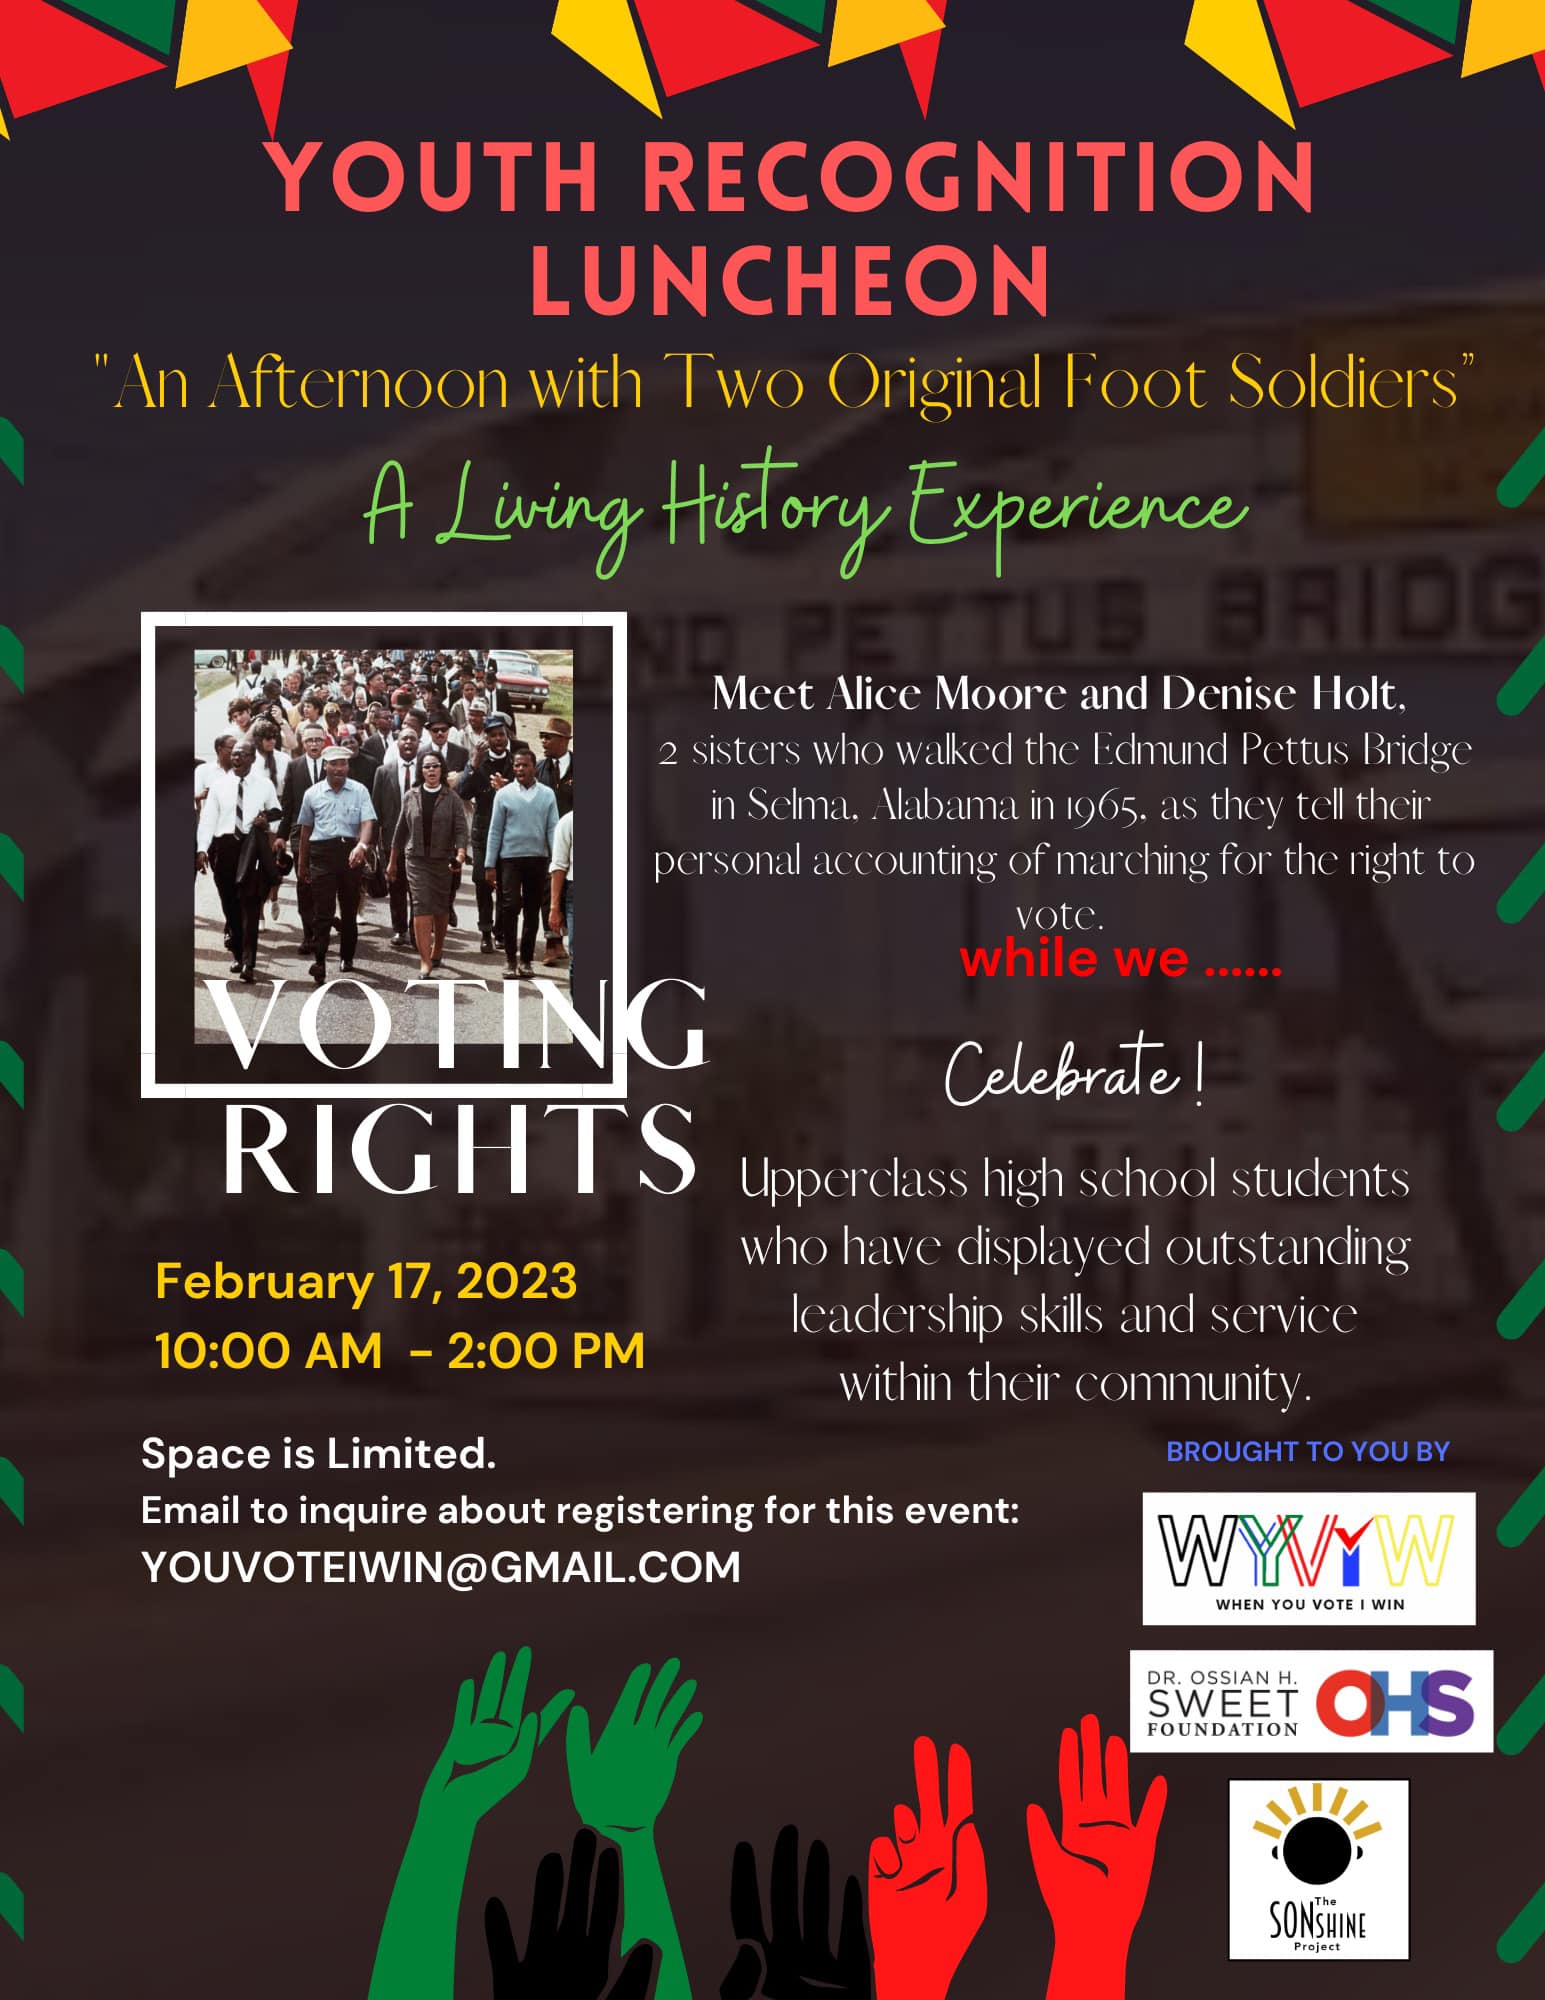 Youth Recognition Luncheon: "An Afternoon with Two Original Foot Soldiers” A Living History ExperienceYouth Recognition Luncheon "An Afternoon with Two Original Foot Soldiers” A Living History Experience